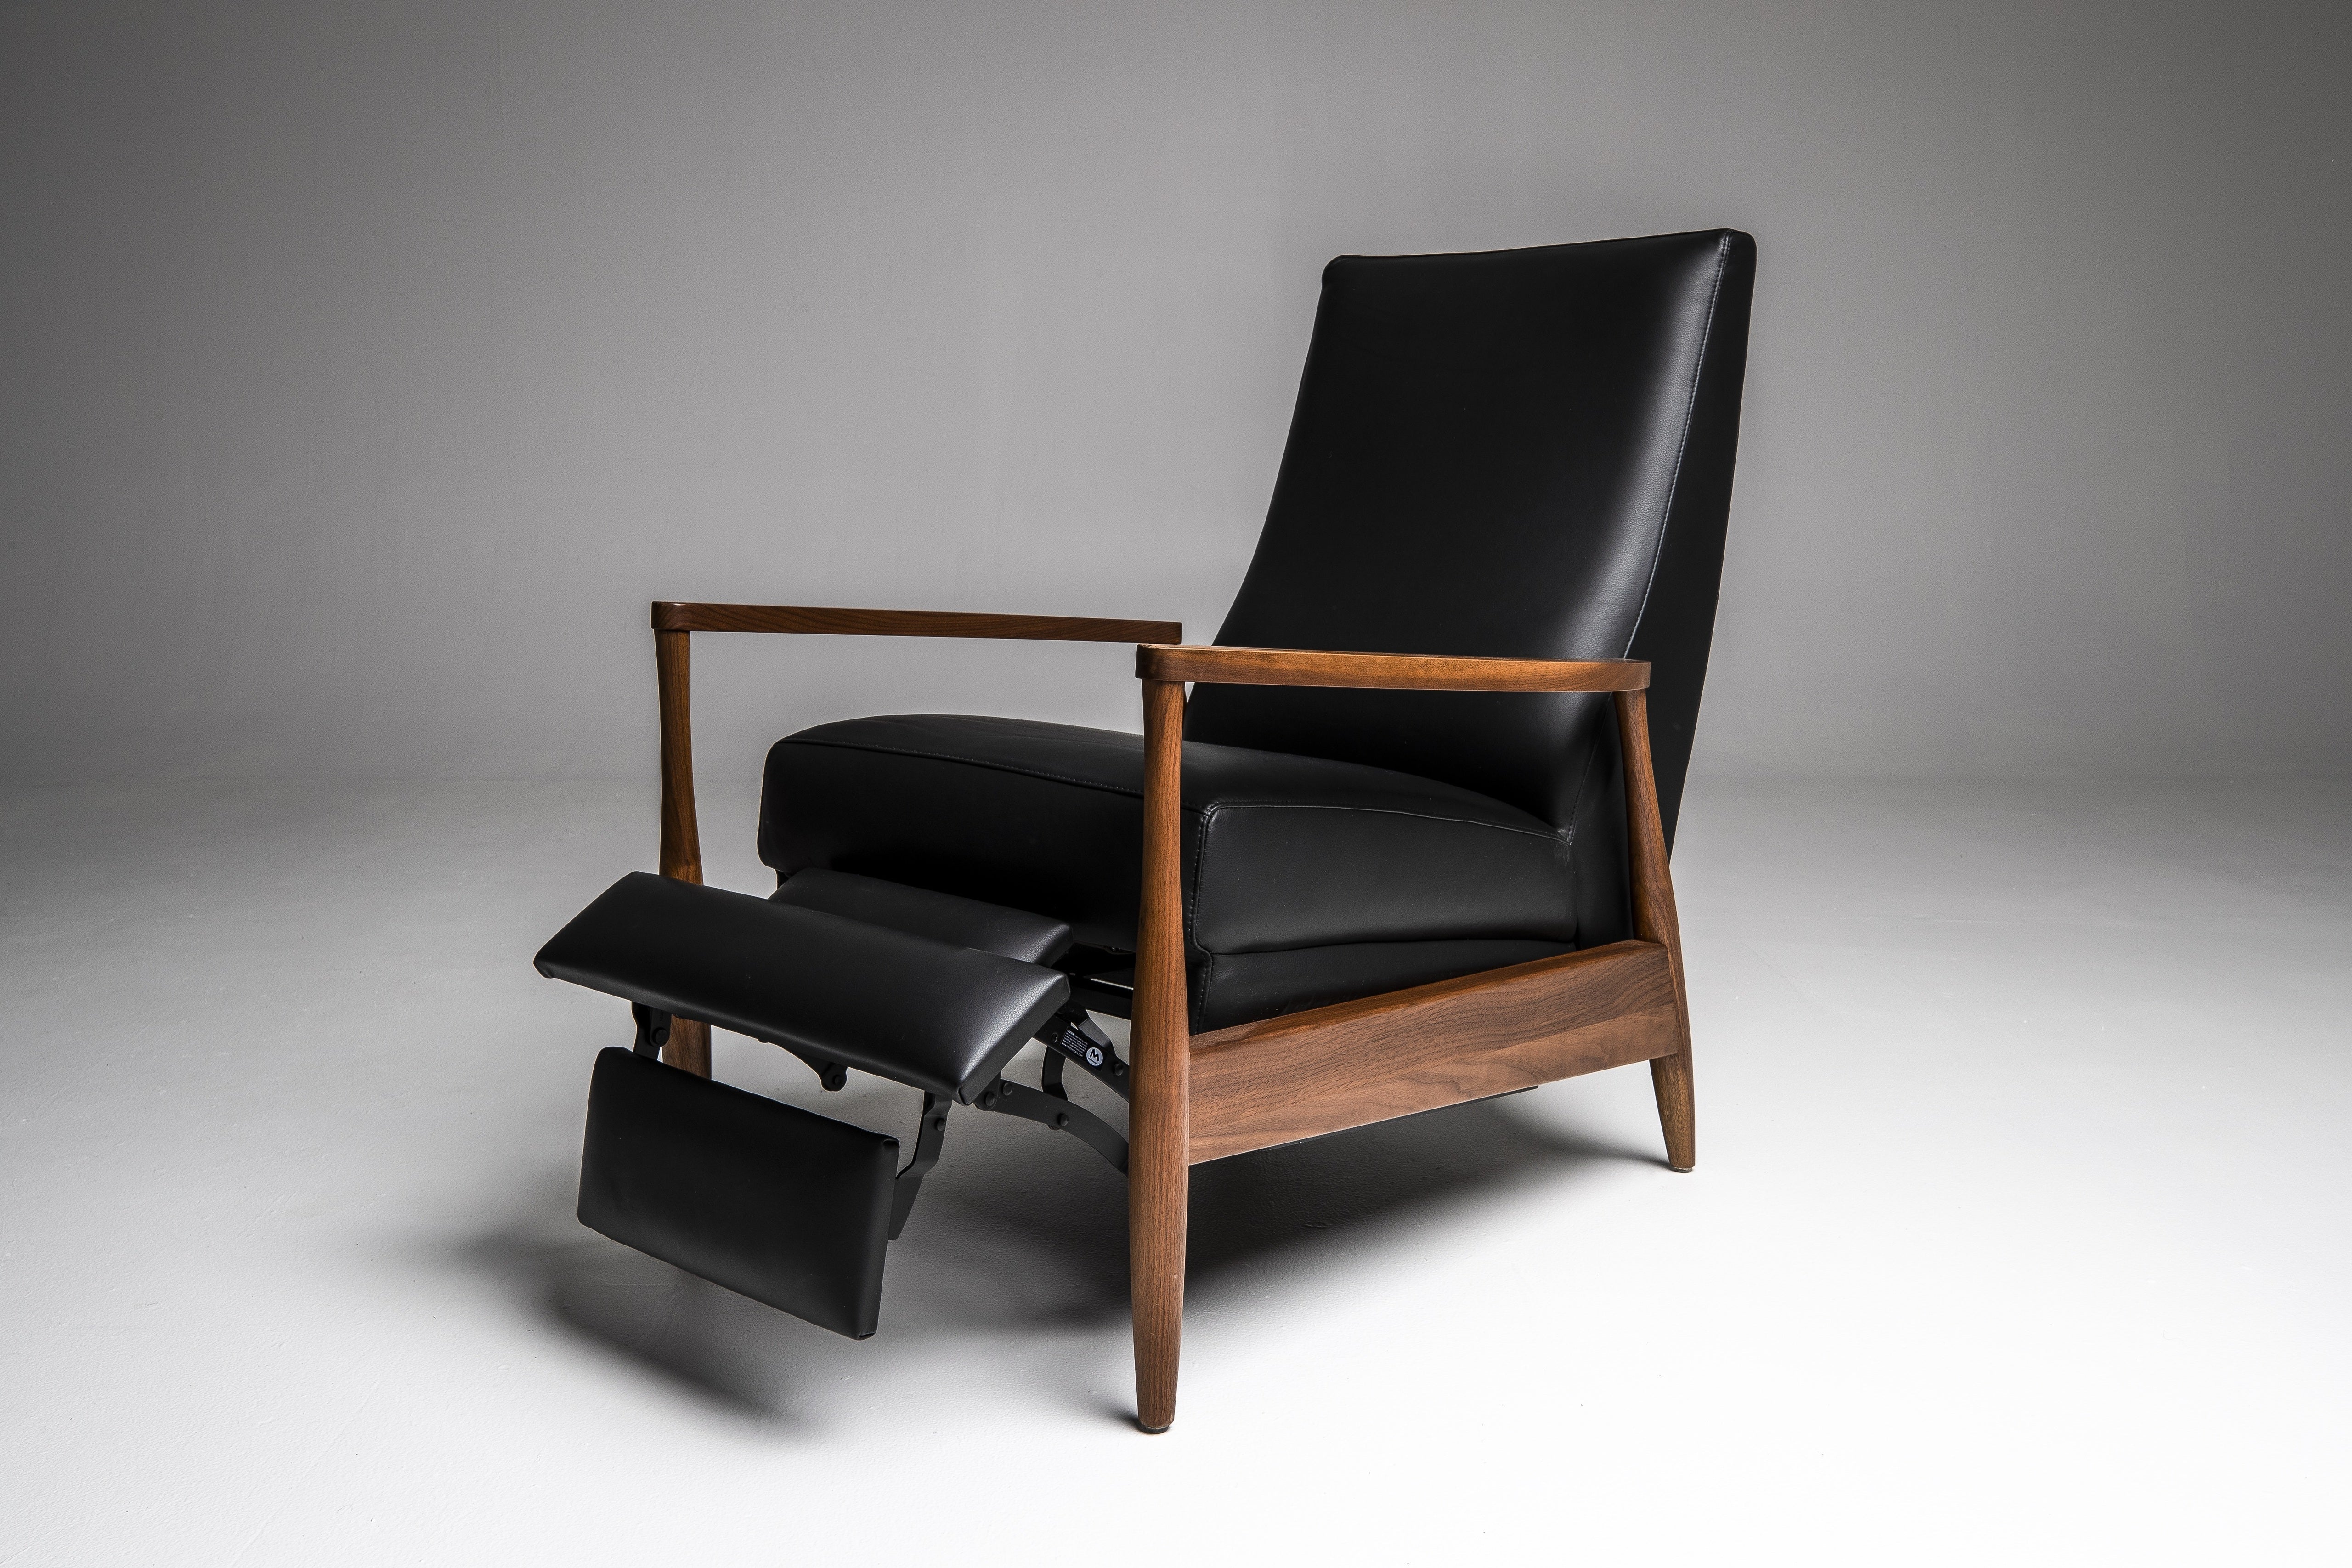 Aston Re-Invented Recliner